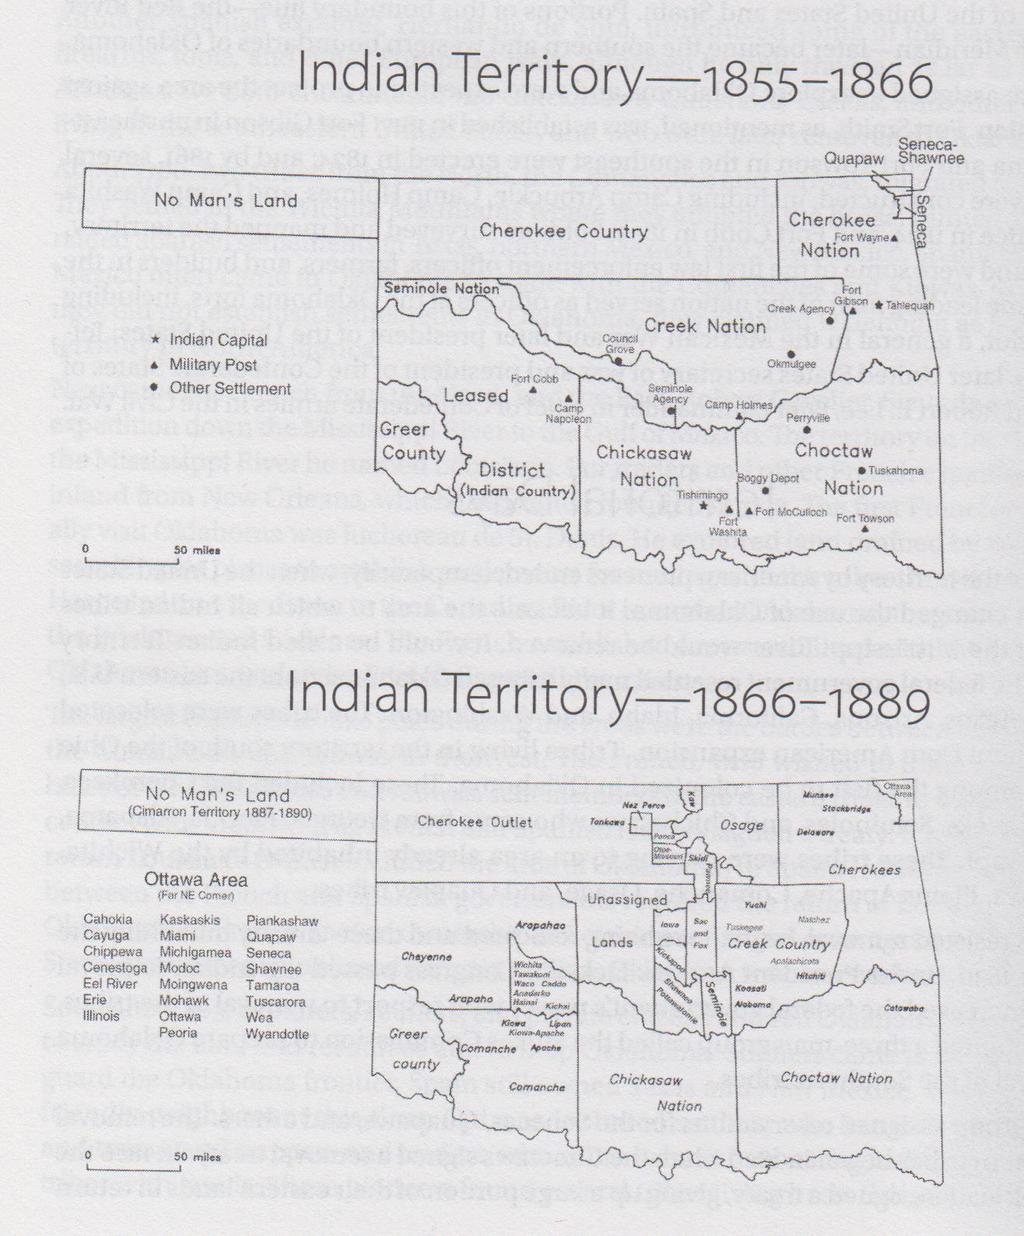 30 The Congressional Act of April 21, 1904, Section 8, set the details of the allotment of Ponca lands. 31 30 Oklahoma Almanac 2013-2014. (54th Ed.). (2013). Page 752.